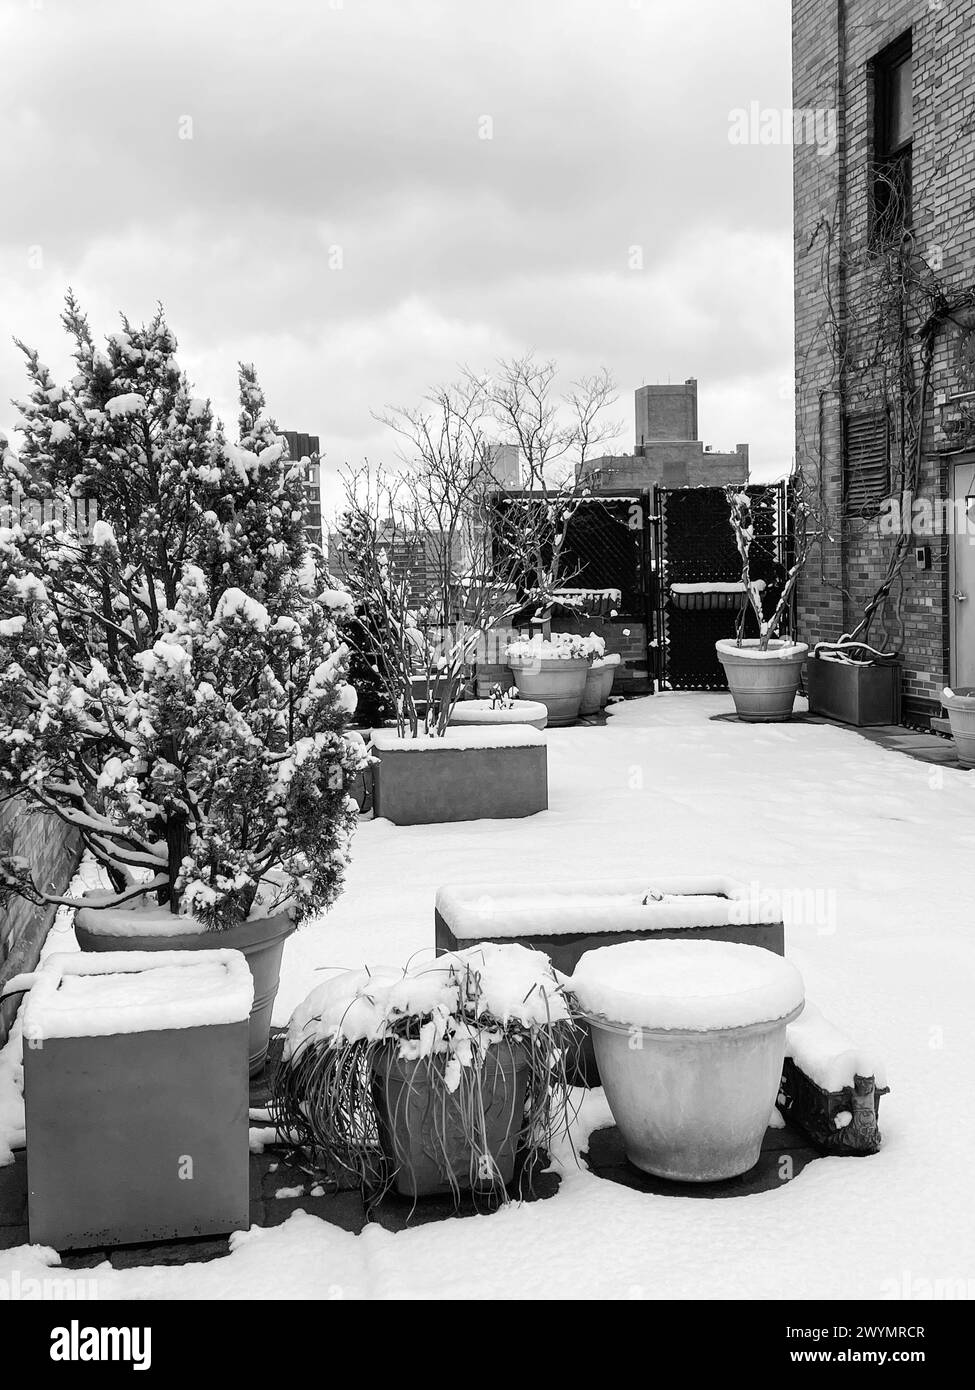 Residential Co-Op Roof Deck,Snow Storm, Murray Hill, Midtown, NYC, 2024 Stock Photo